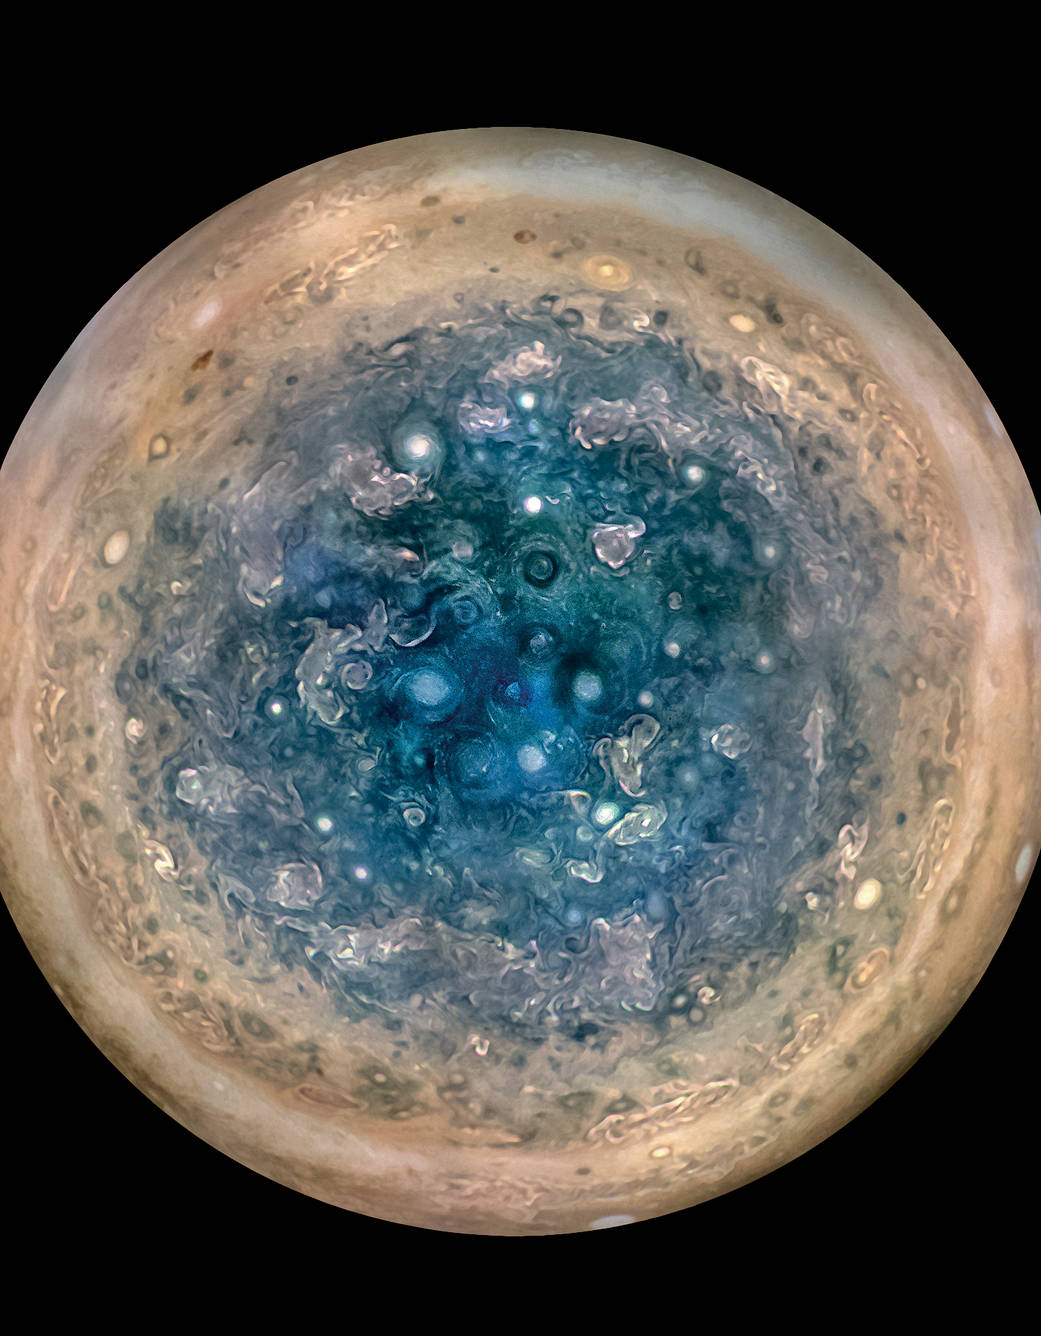 This image shows Jupiter’s south pole, as seen by NASA’s Juno spacecraft from an altitude of 32,000 miles